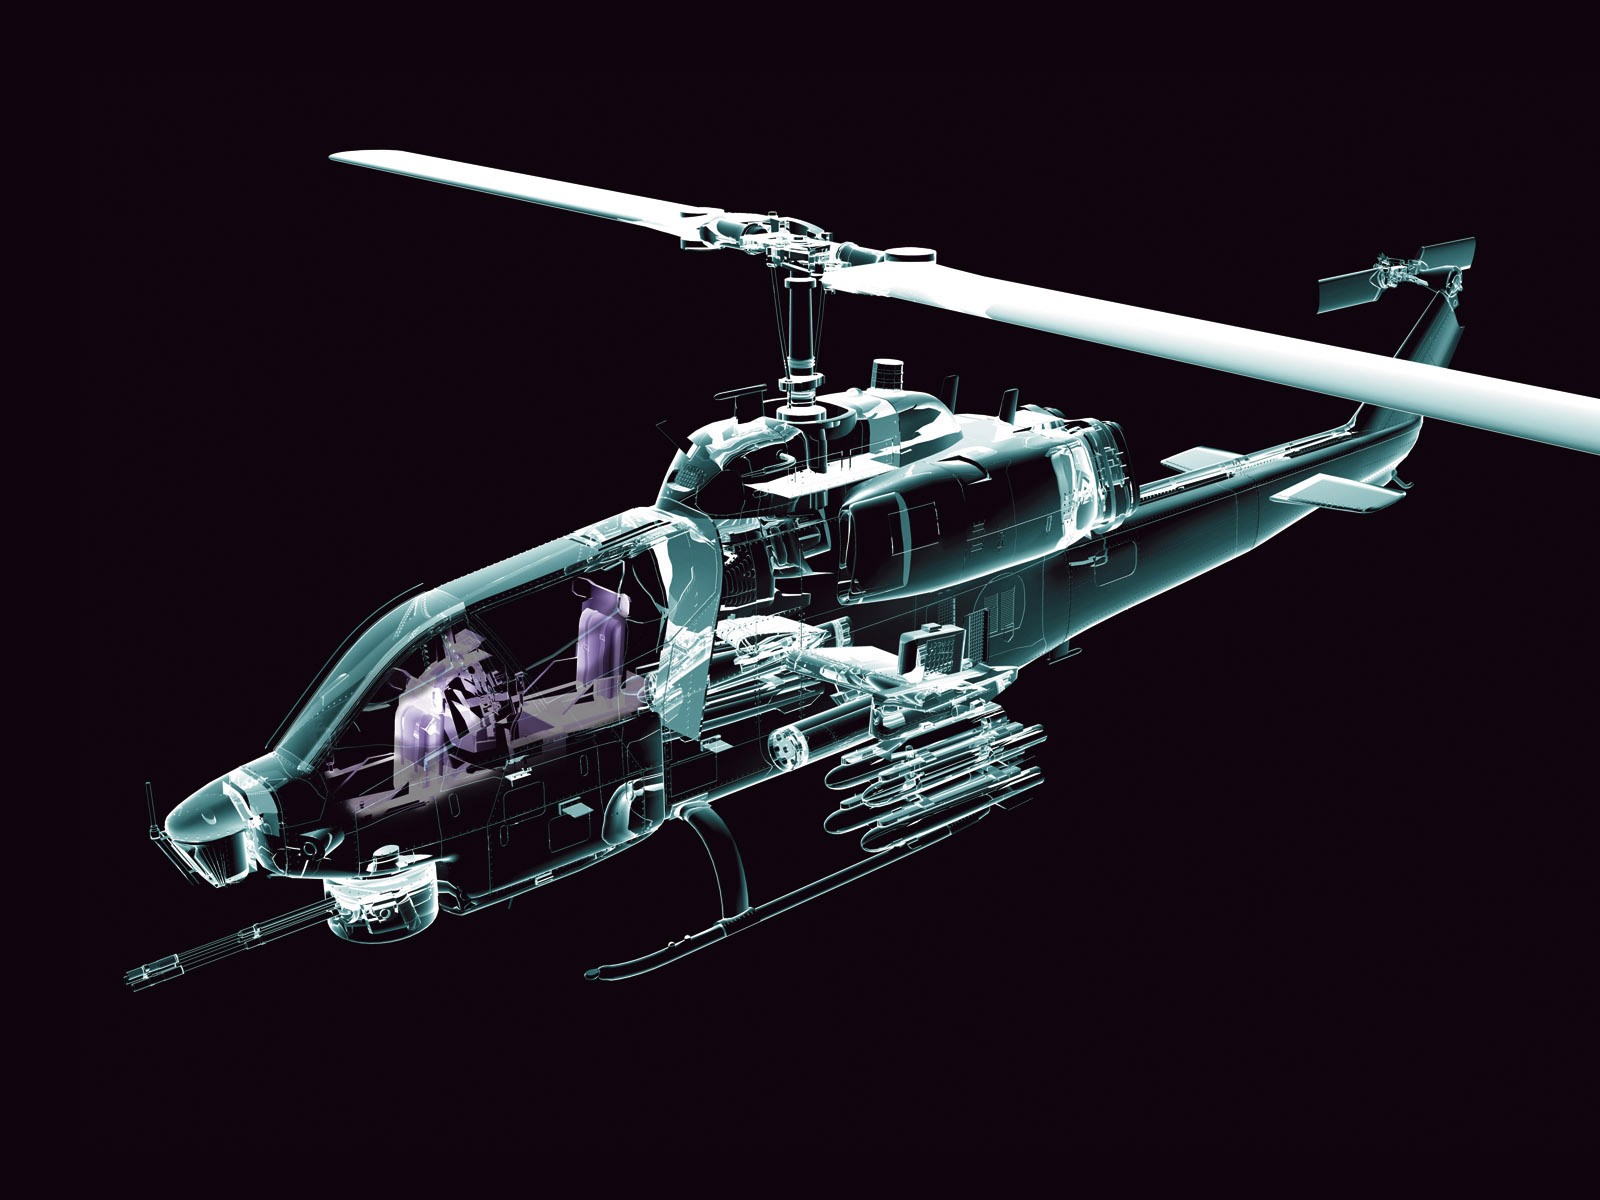 Helicopter Wallpaper Image High Resolution